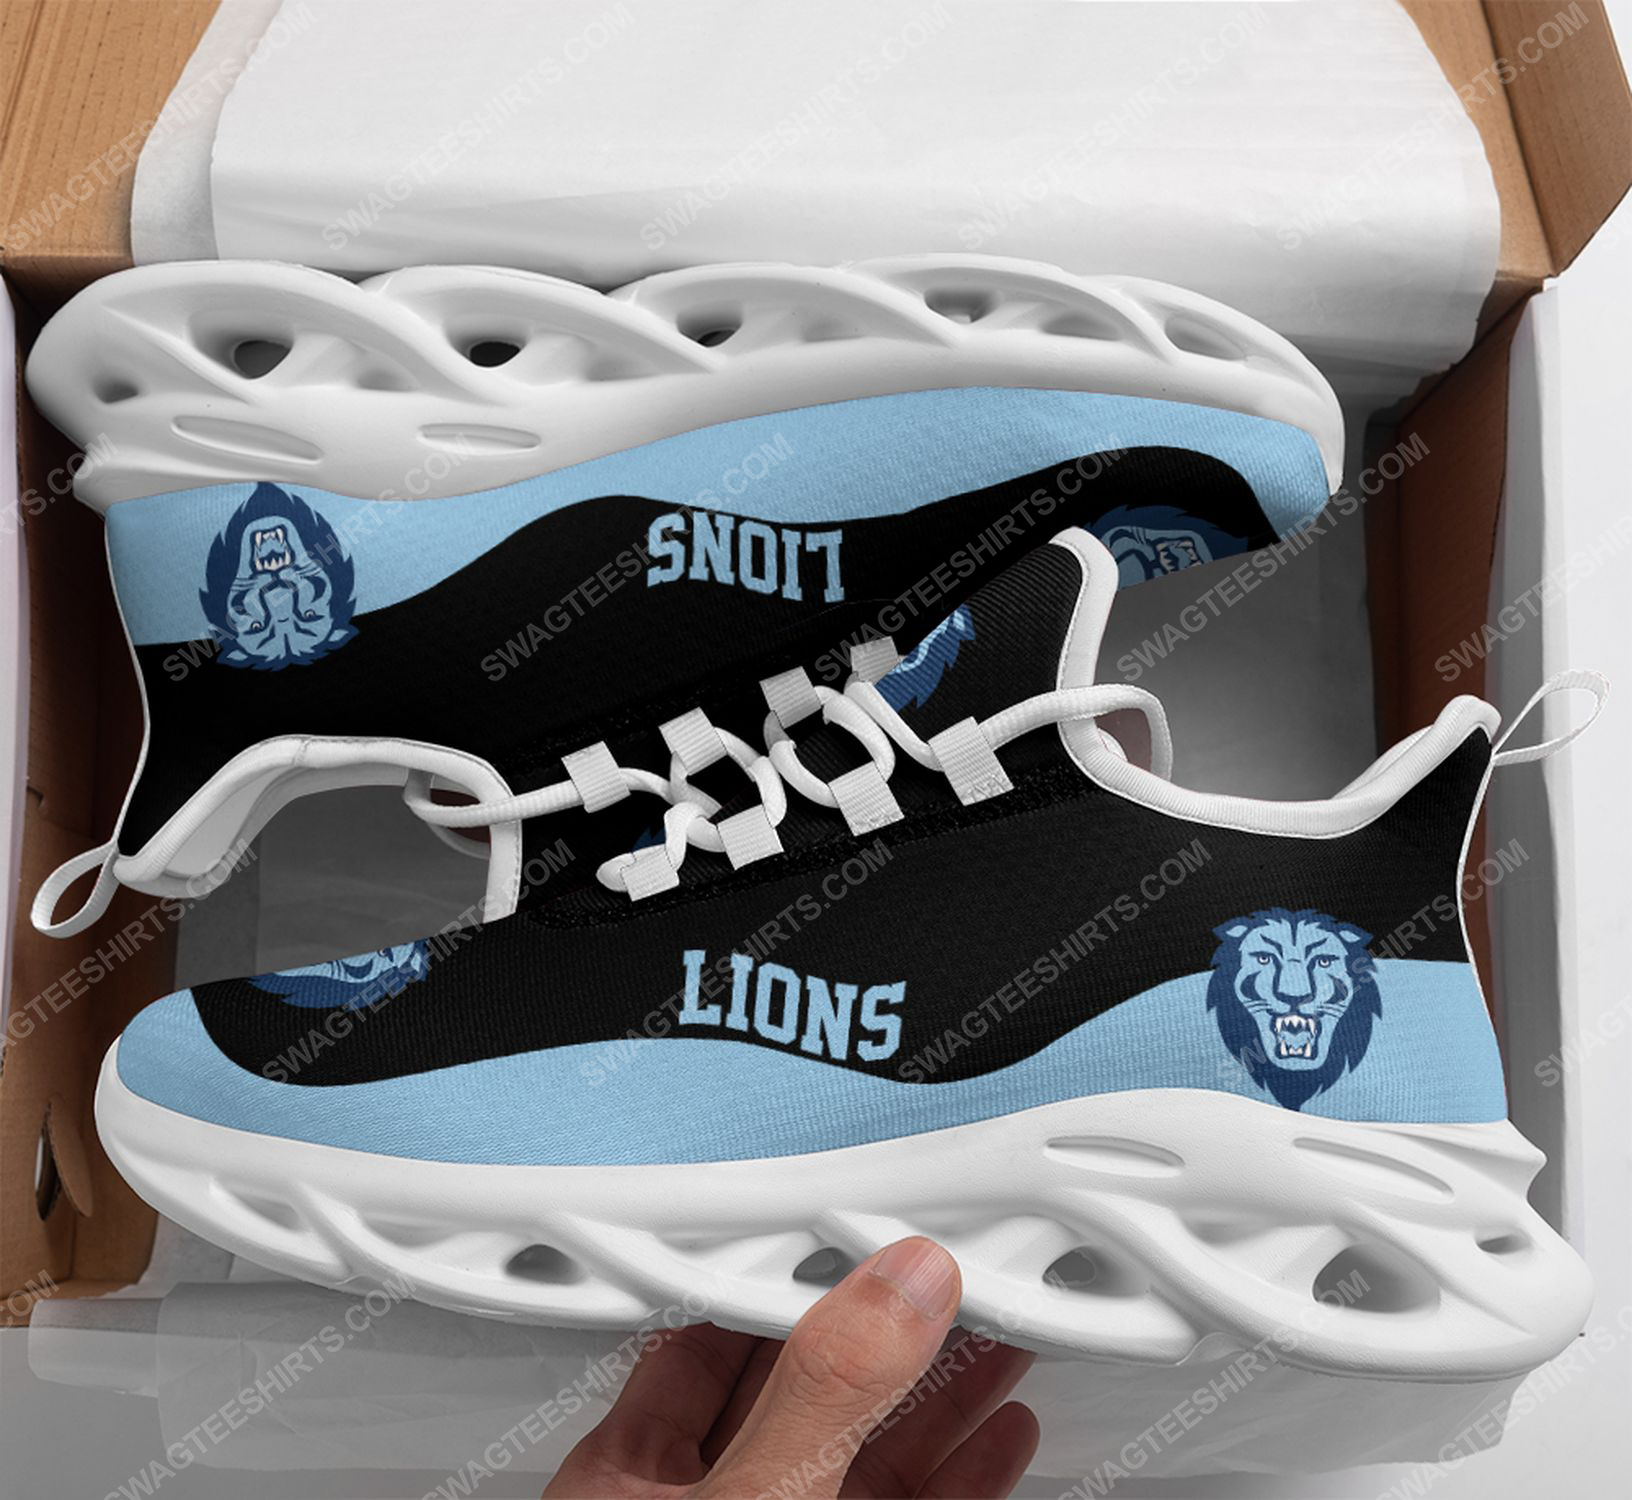 The columbia lions football team max soul shoes 1